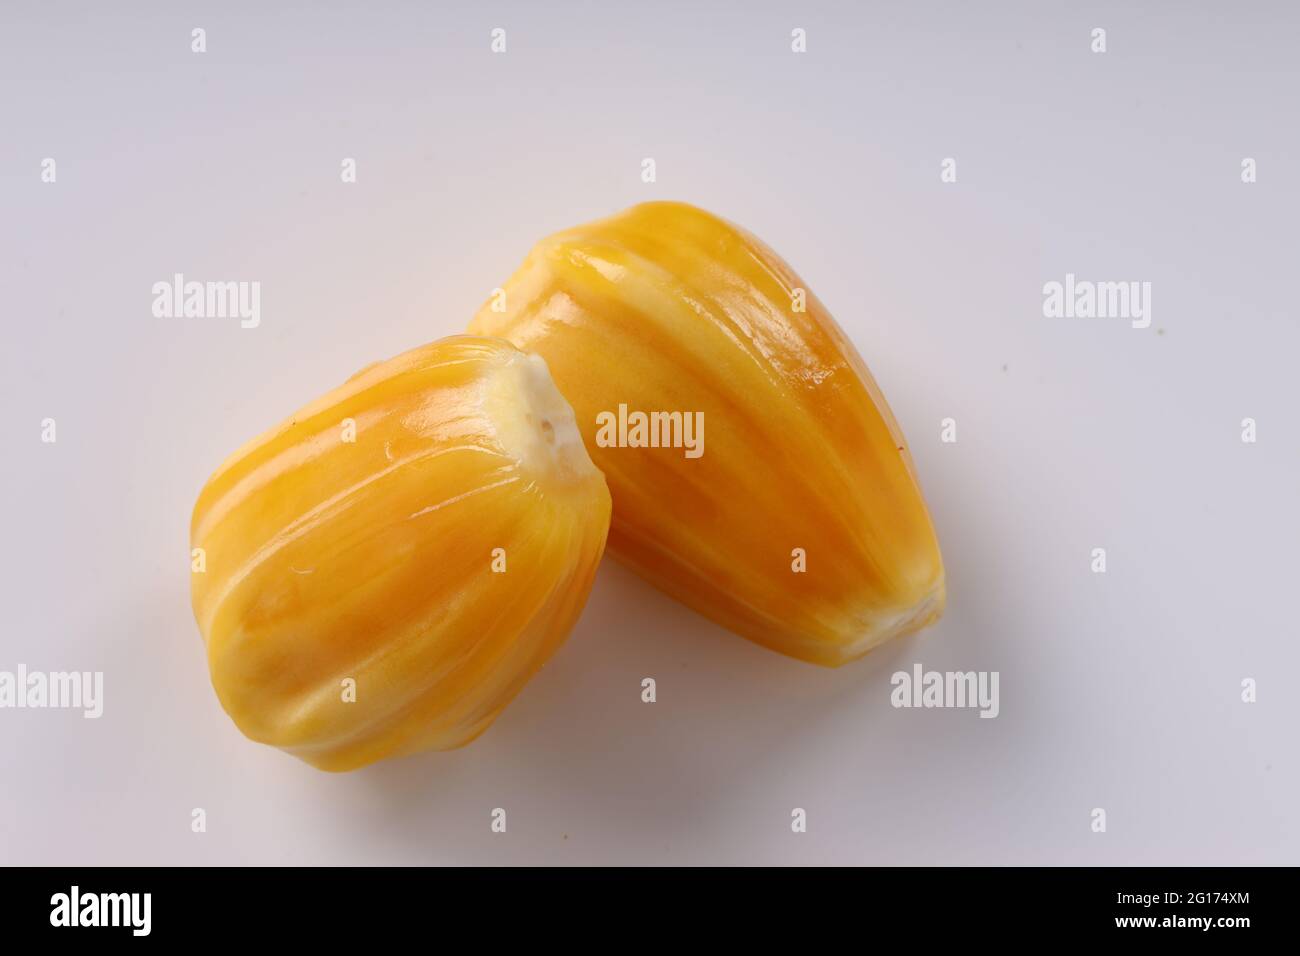 Ripe Jackfruit arranged beautifully in a  white textured background, isolated. Stock Photo